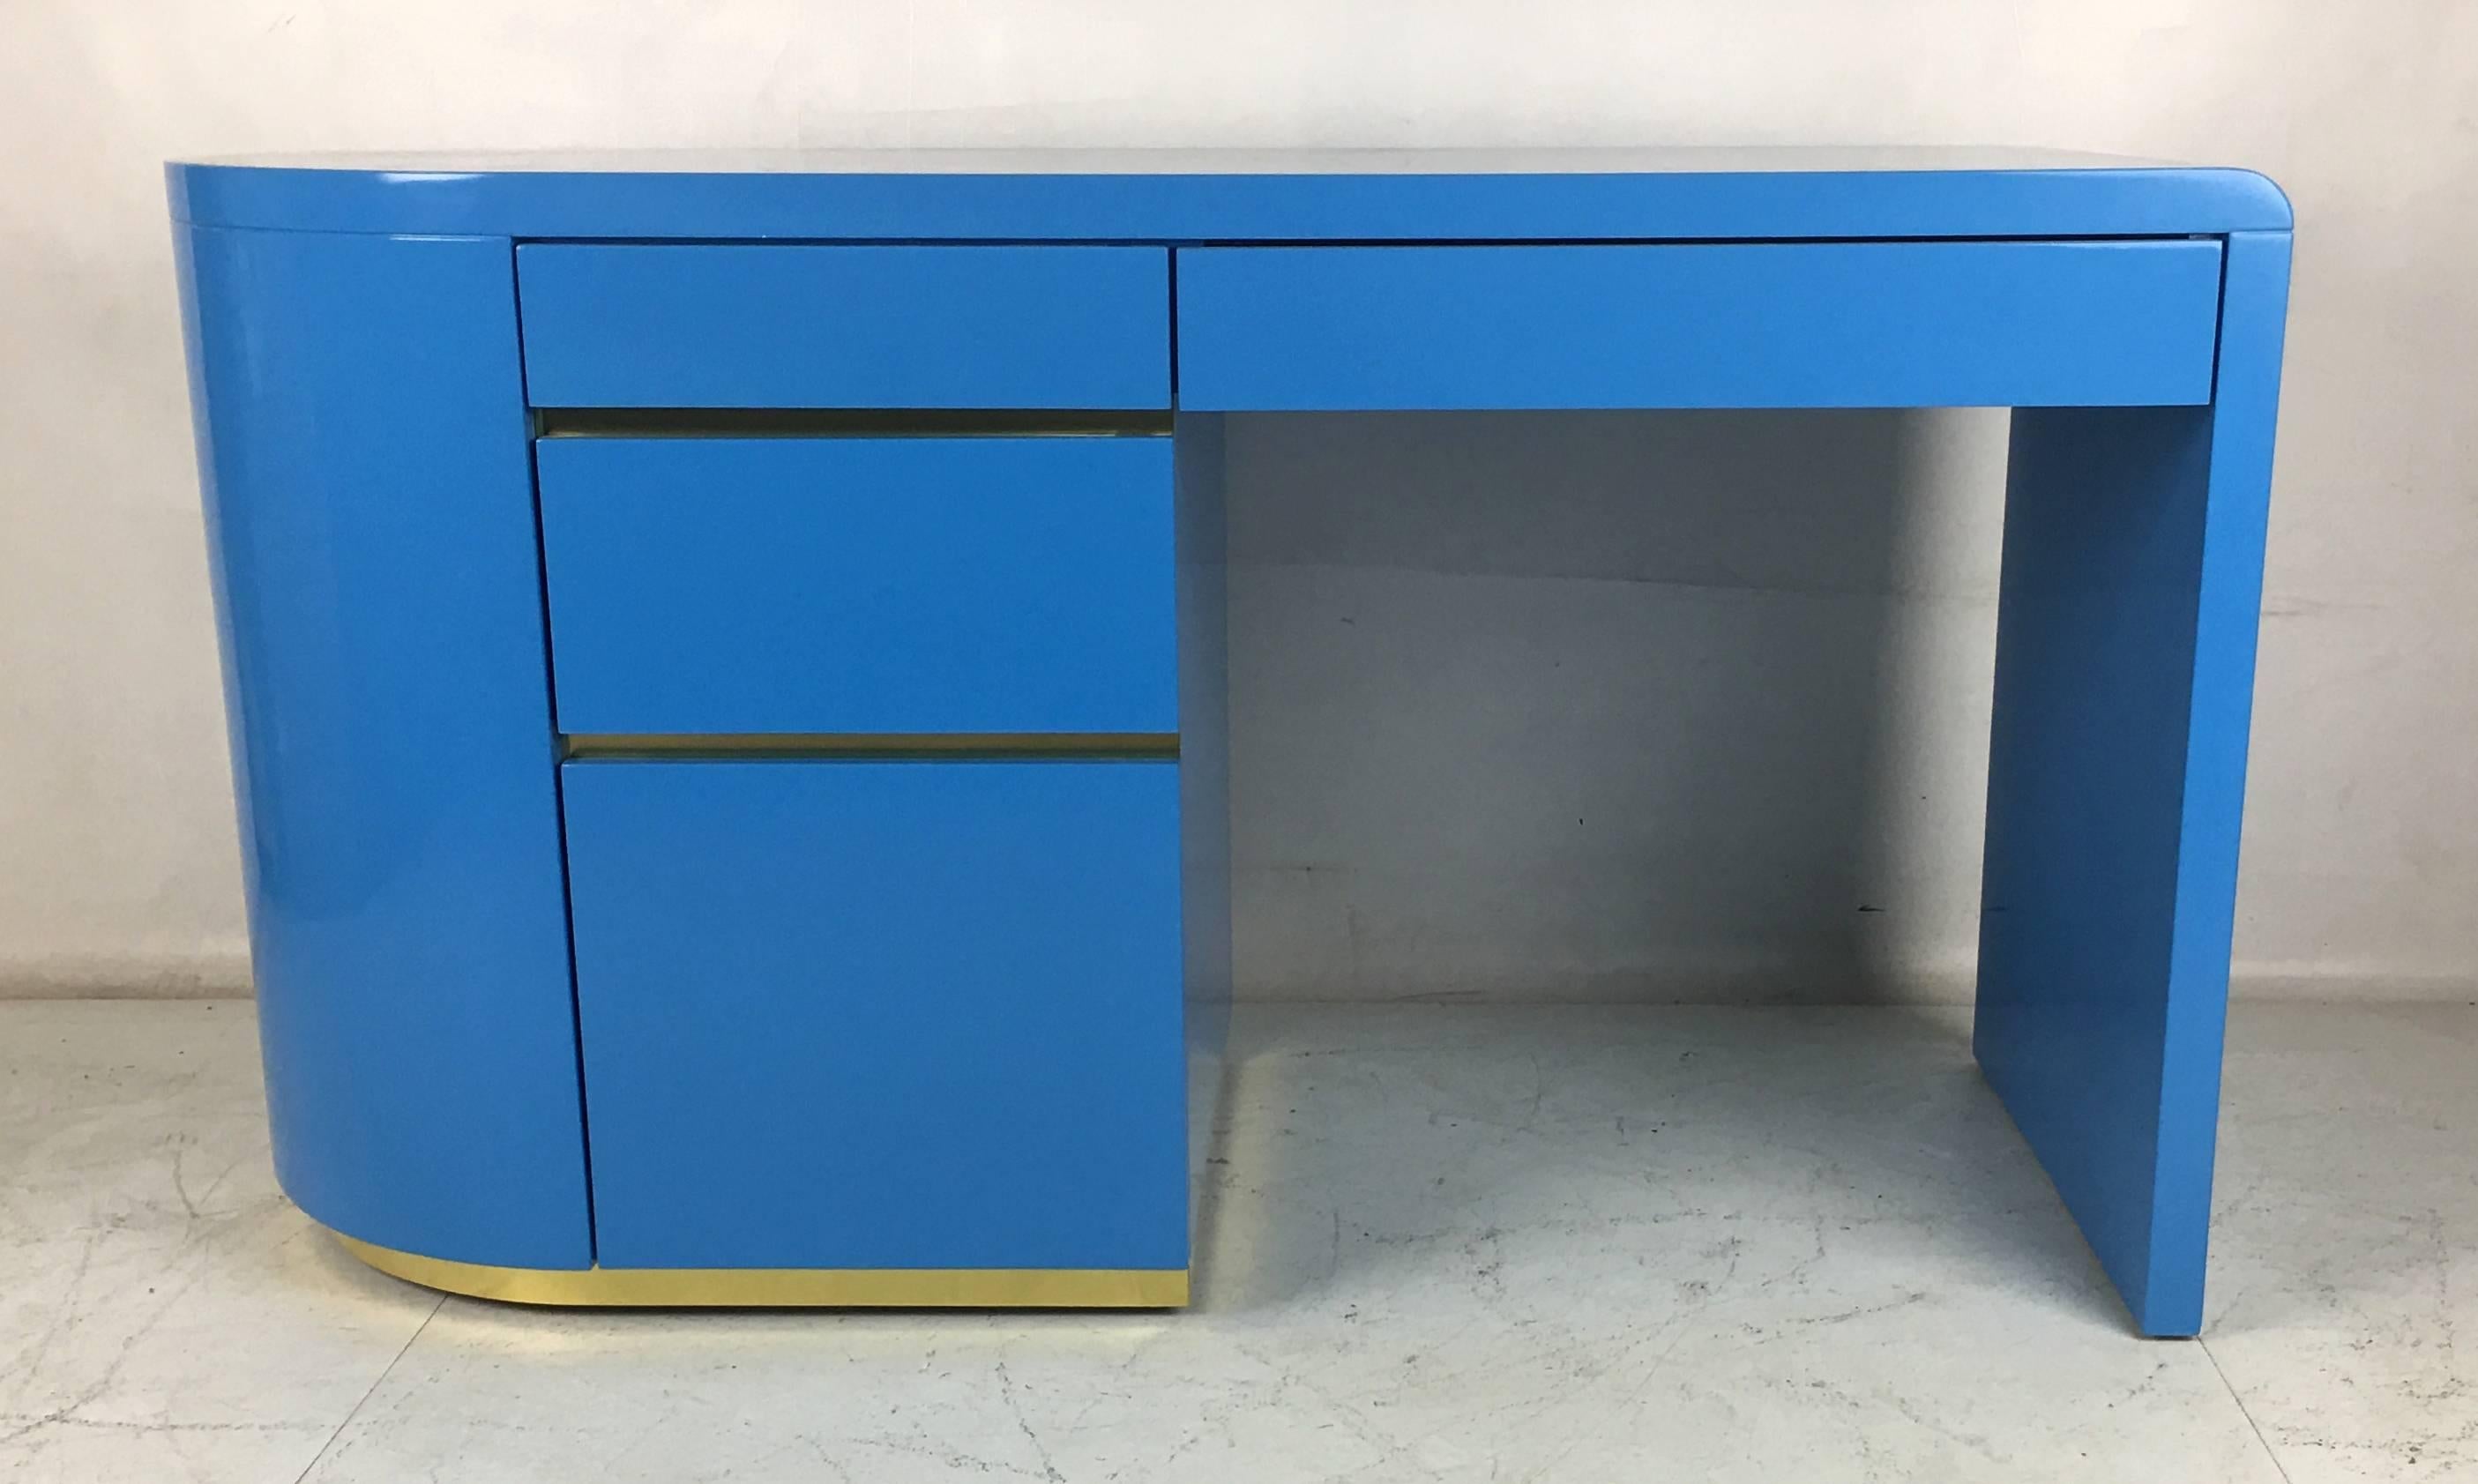 Luxurious writing desk refinished in hand polished Gauloise blue lacquer in the style of Steve Chase. The solid brass trim has been replaced with new material. 

Dimensions:
55 x 24 x 30.5
Kneehole- 25 high x 25.5 wide.